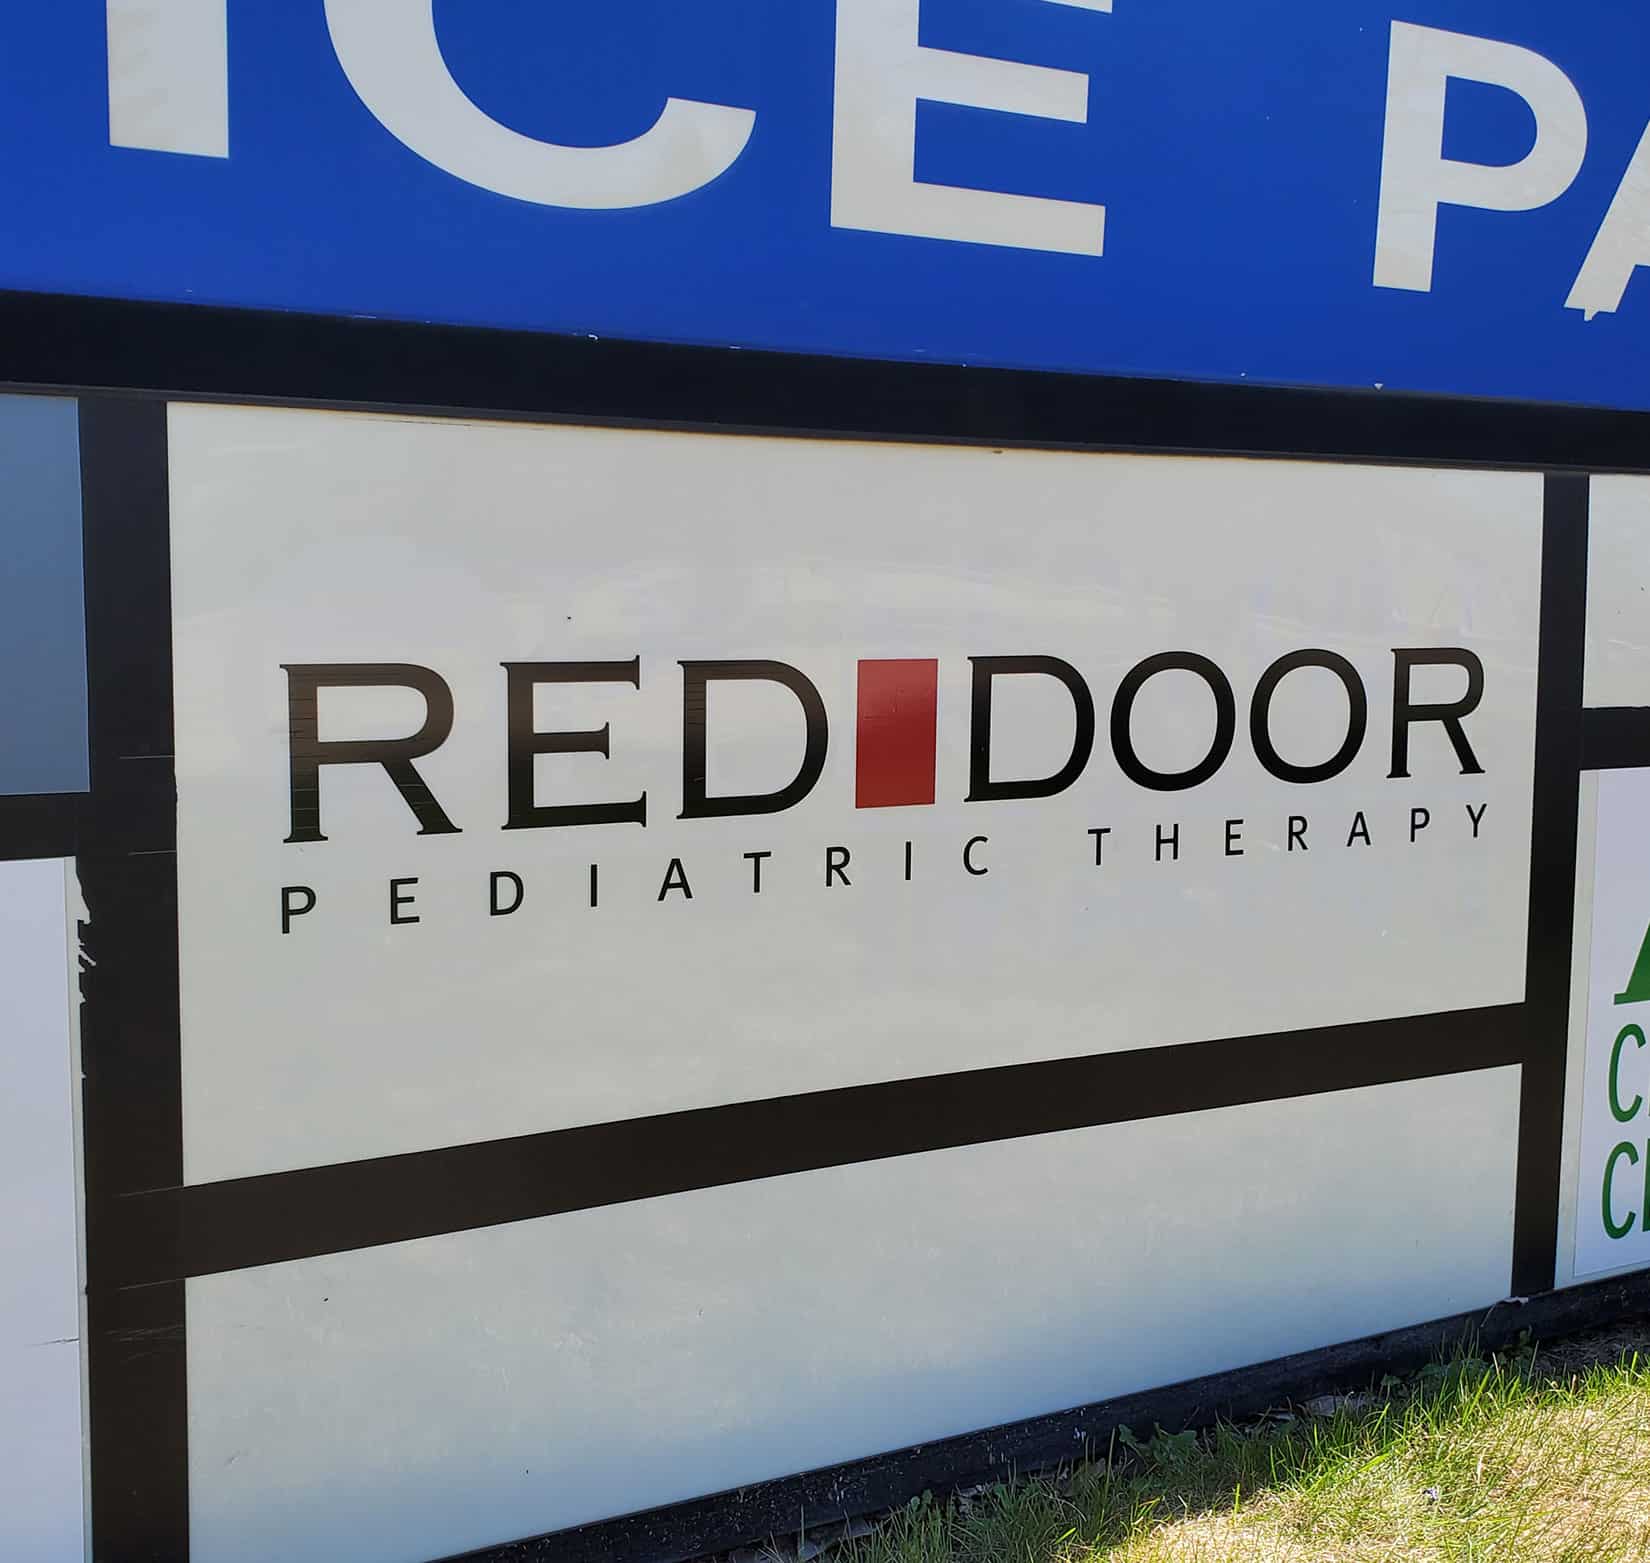 An exterior monument sign for Red Door Pediatric Therapy